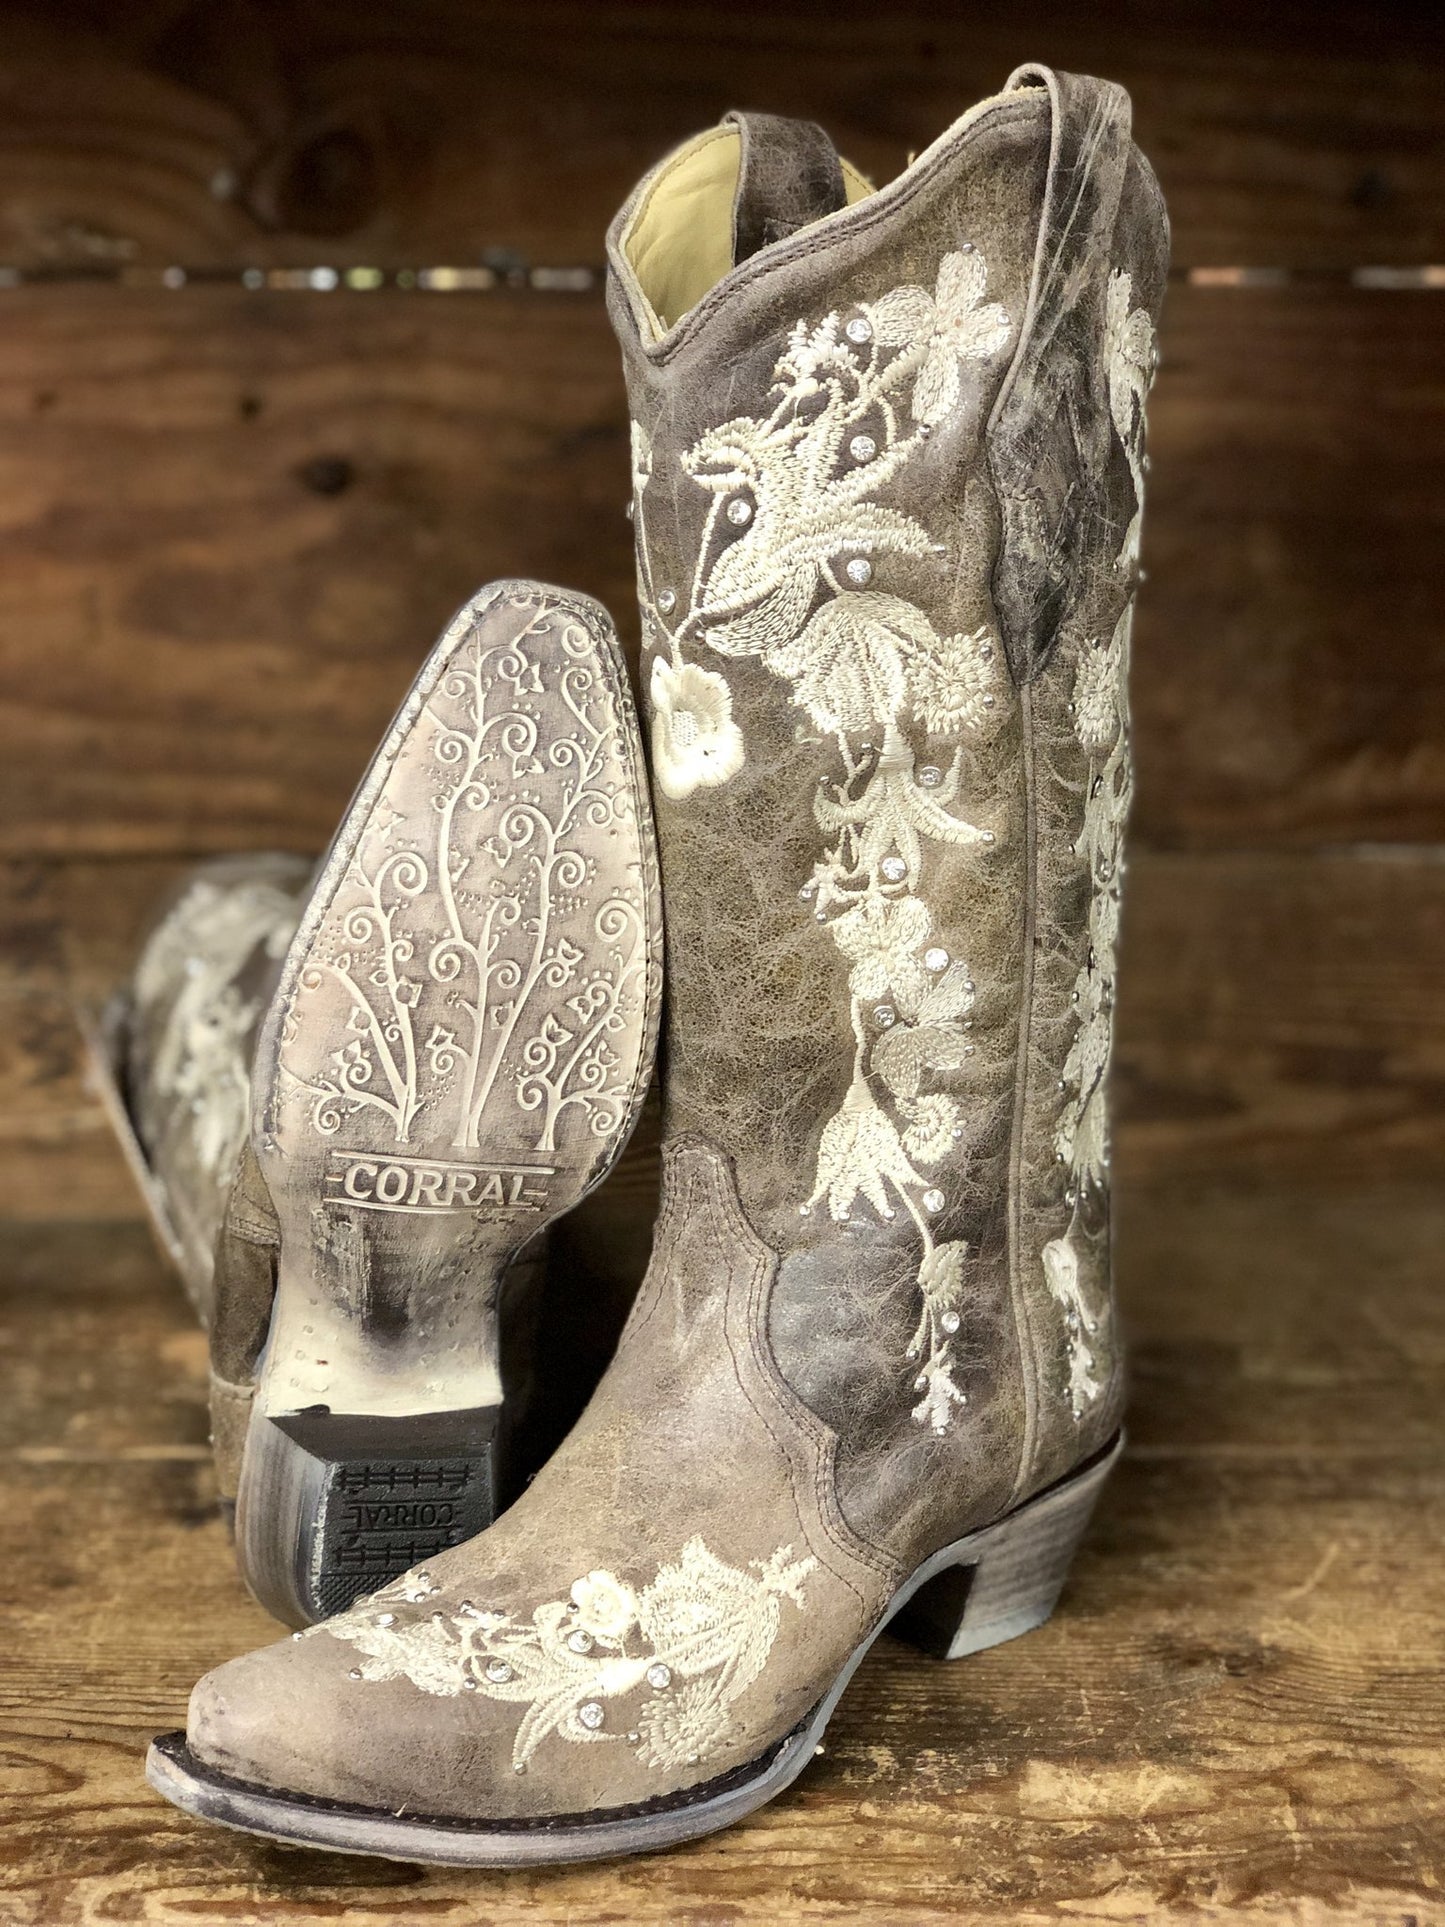 A3572 Corral Women's TOBACCO STUDS & FLOWERS Boot